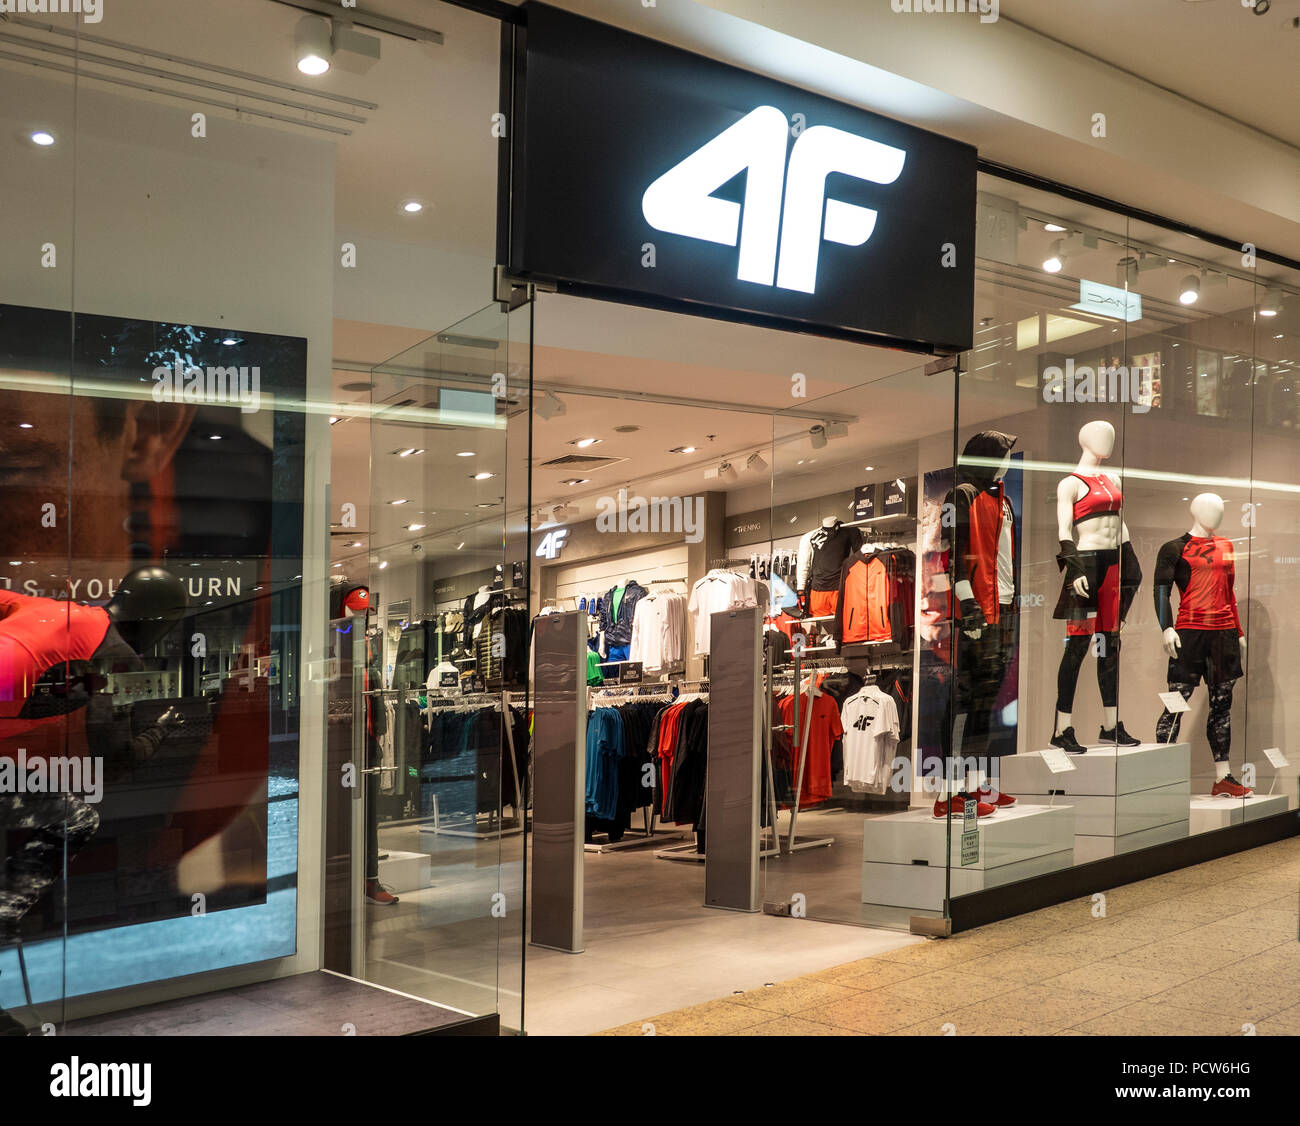 4F store in Galeria Krakowska. 4f is a leading Polish company producing  high quality sportswear and tourism clothing Stock Photo - Alamy